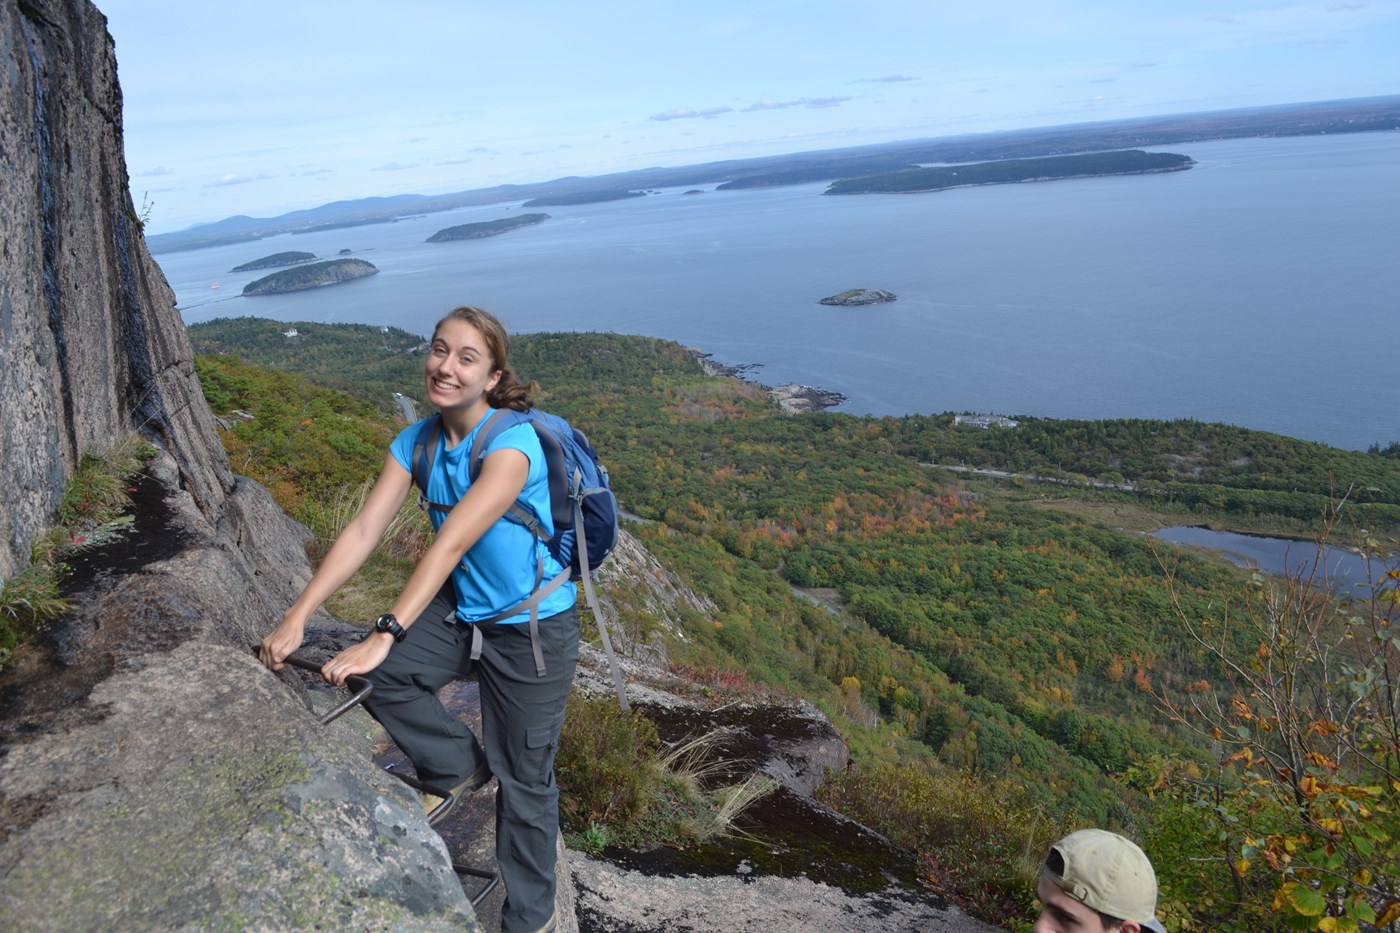 Student posing on Acadia hiking trip in fall.